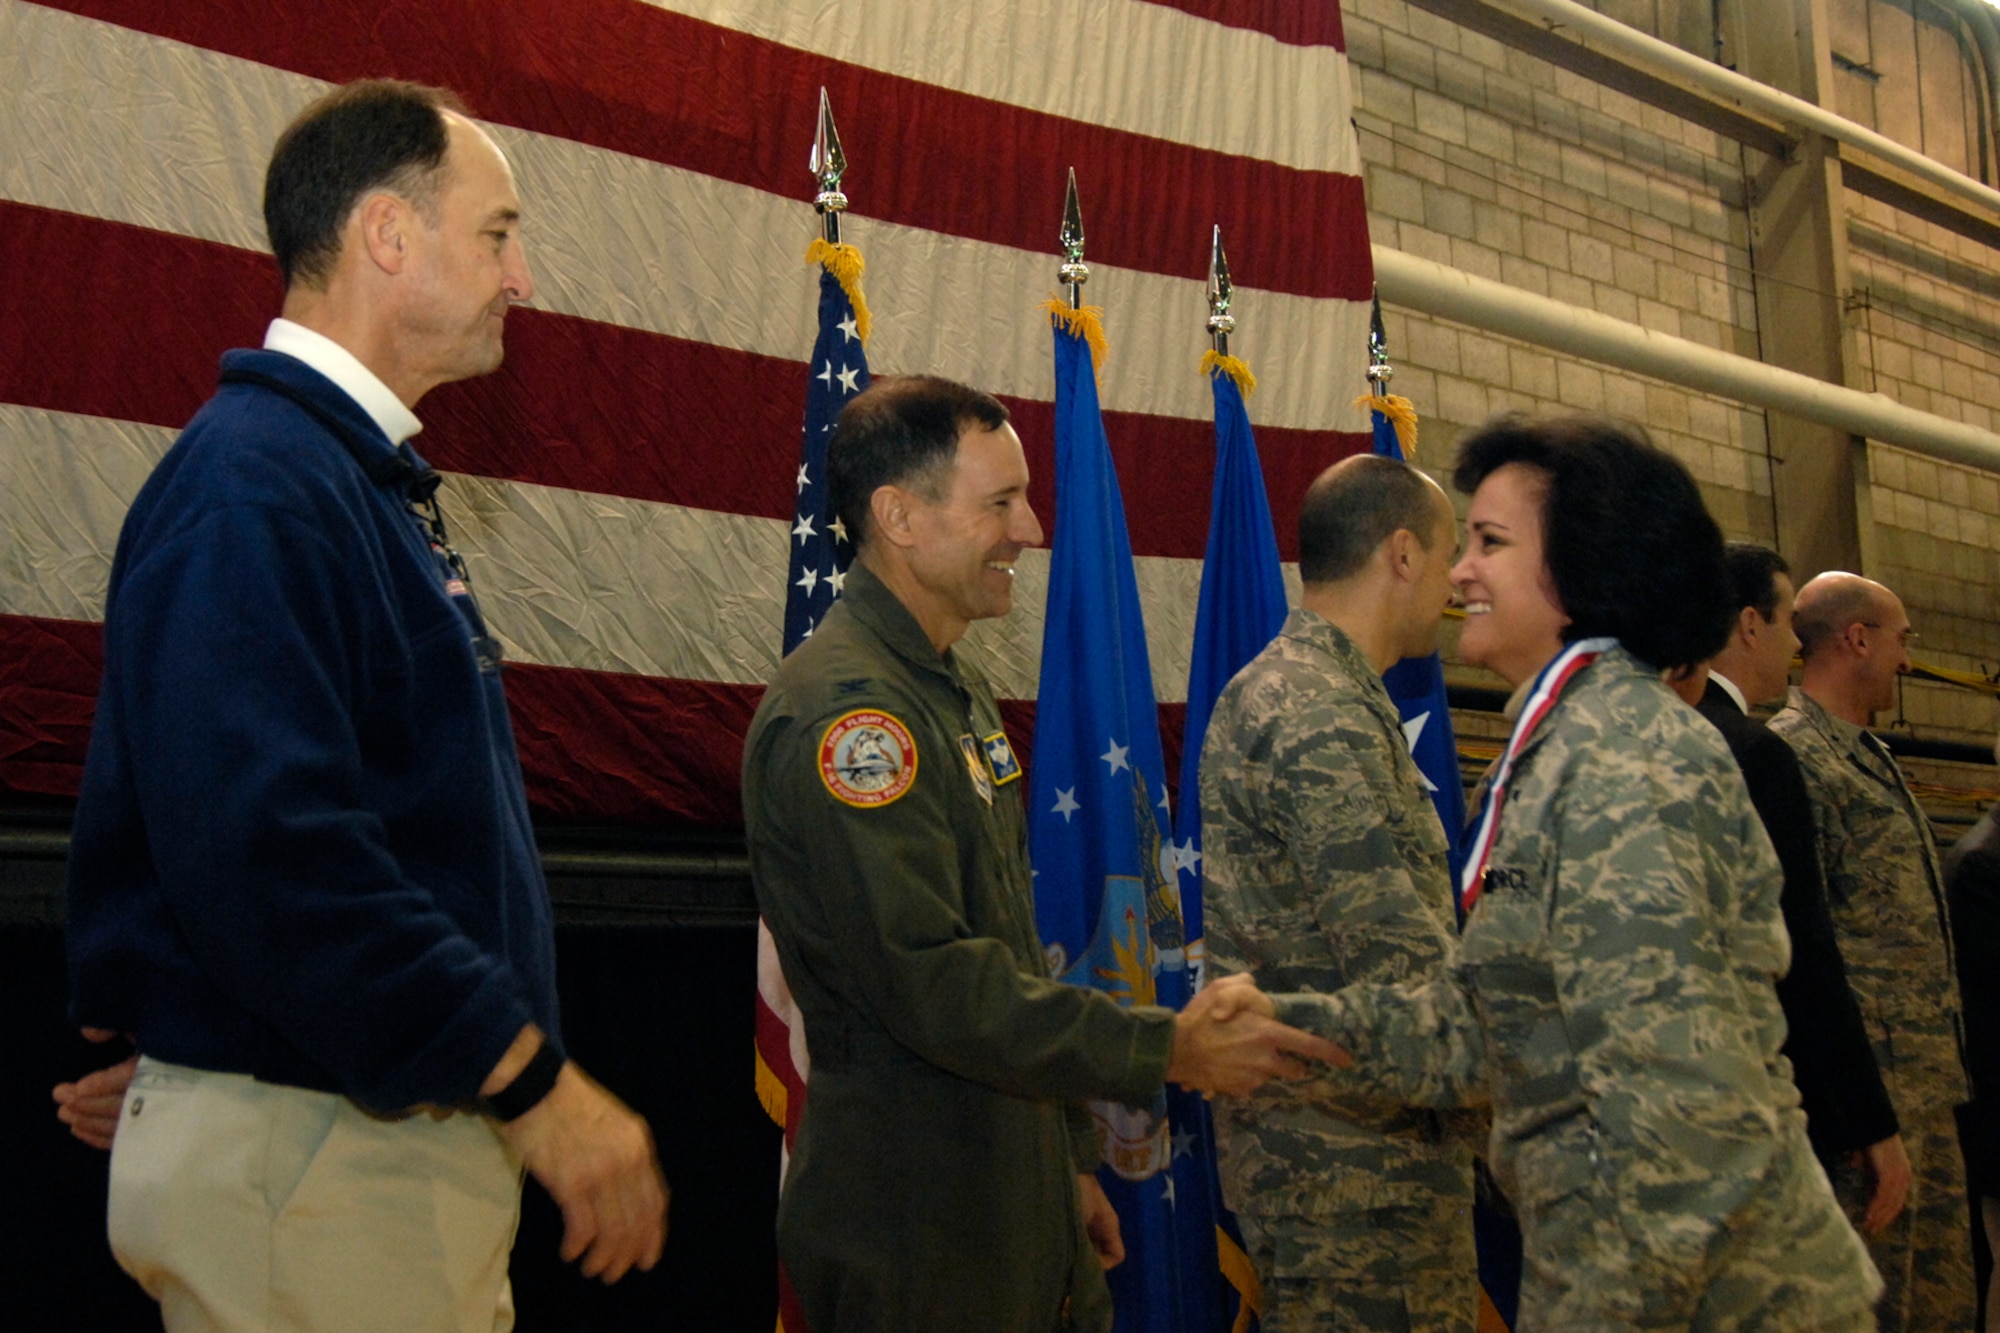 HANSCOM AIR FORCE BASE, Mass. – Maj. Elisa Valenzuela (right) is welcomed home by Col. David Orr (second from left), 66th Air Base Wing commander and former New England Patriots quarterback Steve Grogan (left) during the Heroes’ Homecoming celebration that took place Dec. 12. The event welcomed home more than 45 Hanscom Airmen who have served on deployments during the past six months. (U.S. Air Force photo by Linda LaBonte Britt)